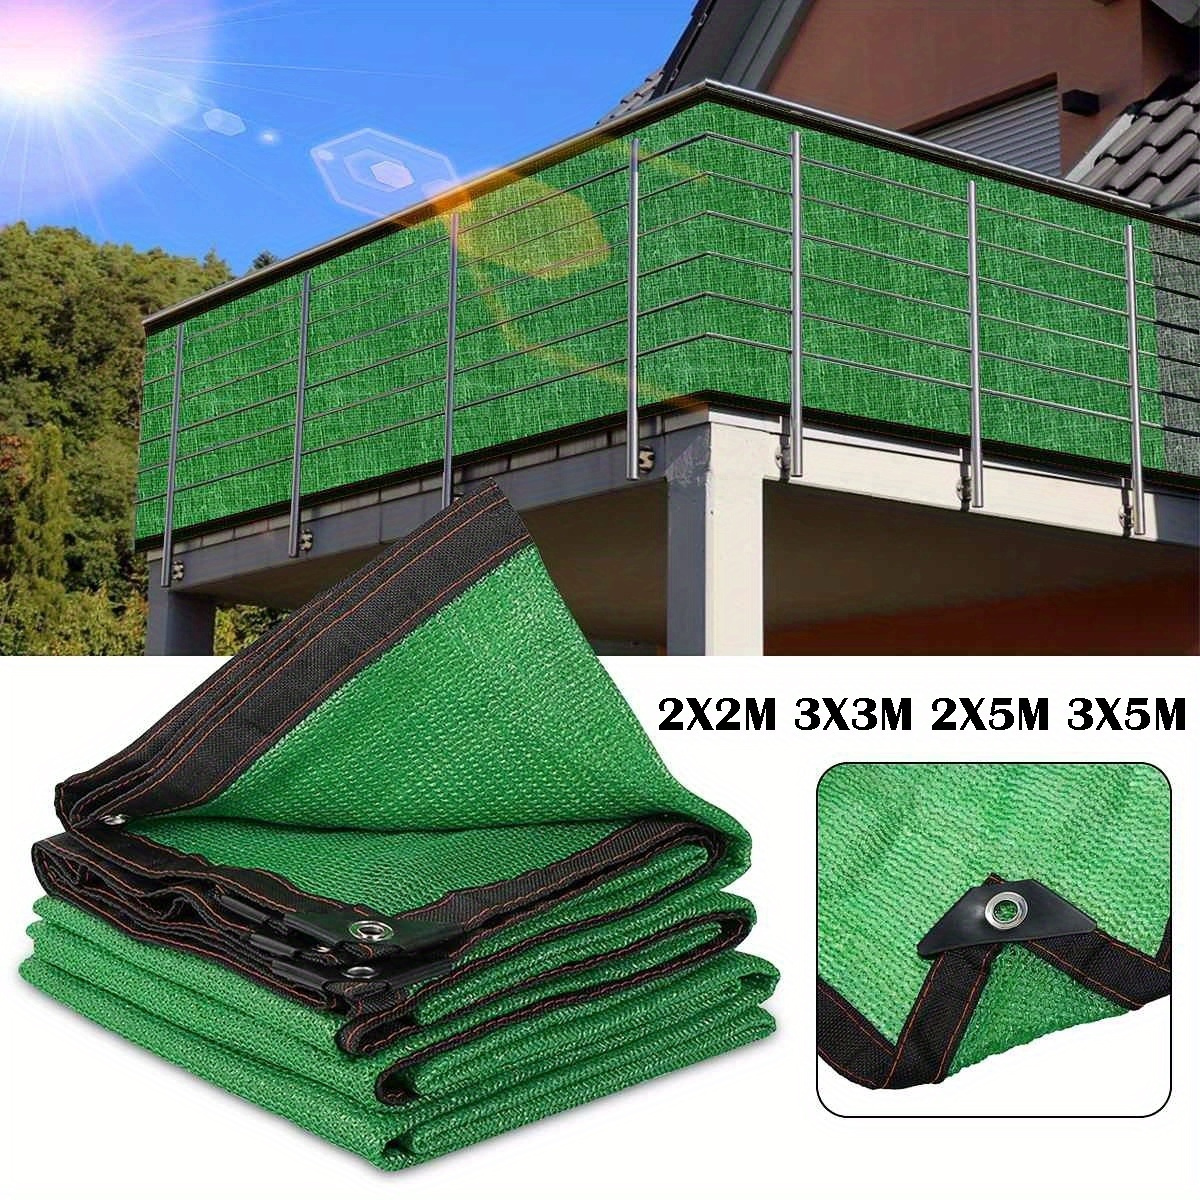 

Green Hdpe Privacy Screen - 90% Shade Rate, Anti-uv Garden Netting For Windbreak & Fencing